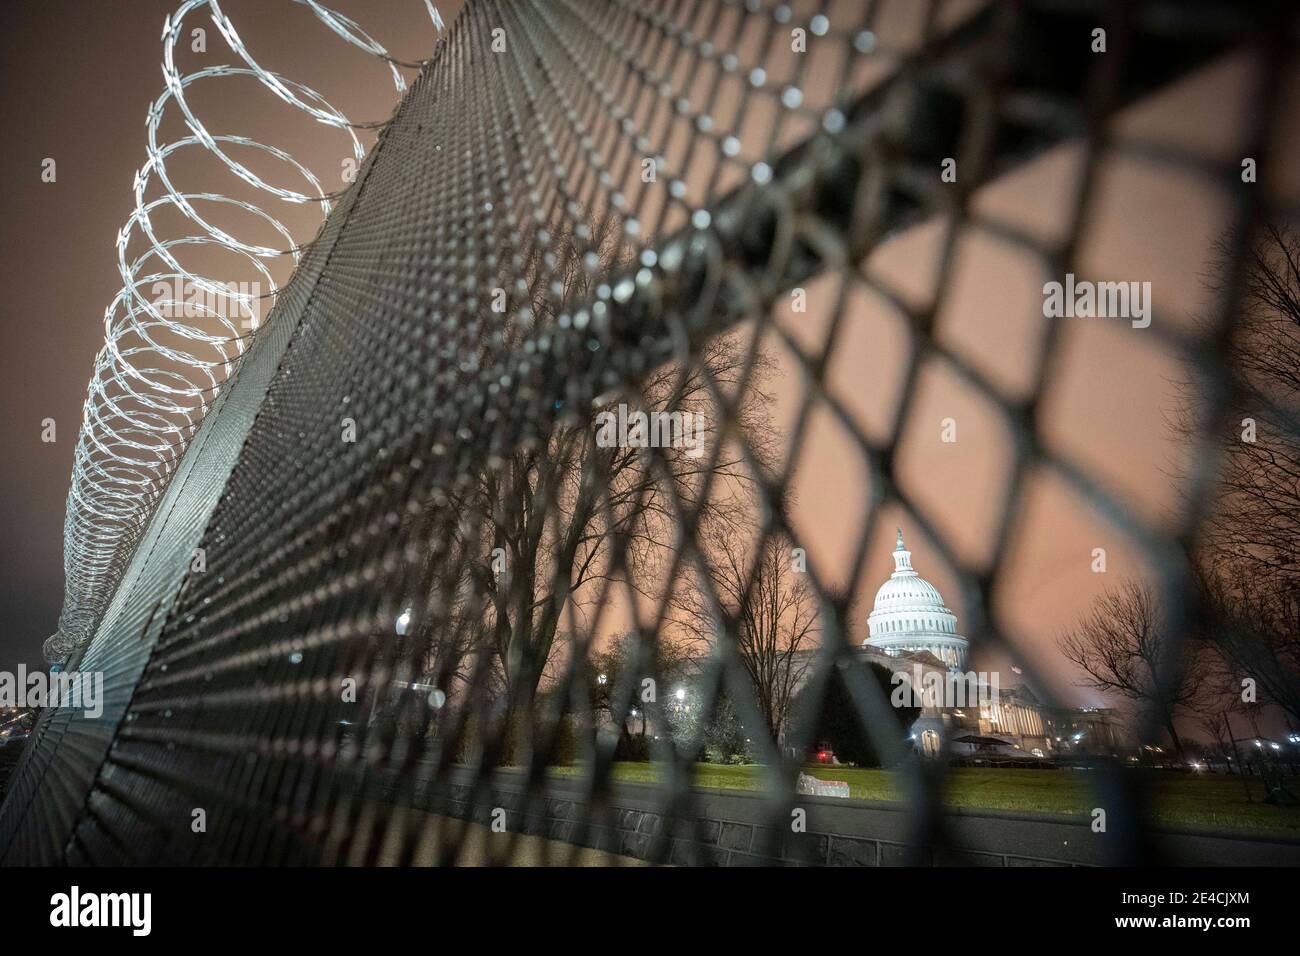 Washington, District of Columbia, U.S.A. 22nd Jan, 2021. Pre-Inaugural security preparations take shape on Capitol Hill and around the U.S. Capitol Building following the January 6th insurrection by President Donald Trump's supporters due to his assertions that the election had been stolen from him. Fencing topped with razor wire surrounds the grounds with streets deserted due to the ongoing lockdown in preparation for President-Elect Joe Biden's Inauguration. Credit: Mark Finkenstaedt/ZUMA Wire/Alamy Live News Stock Photo